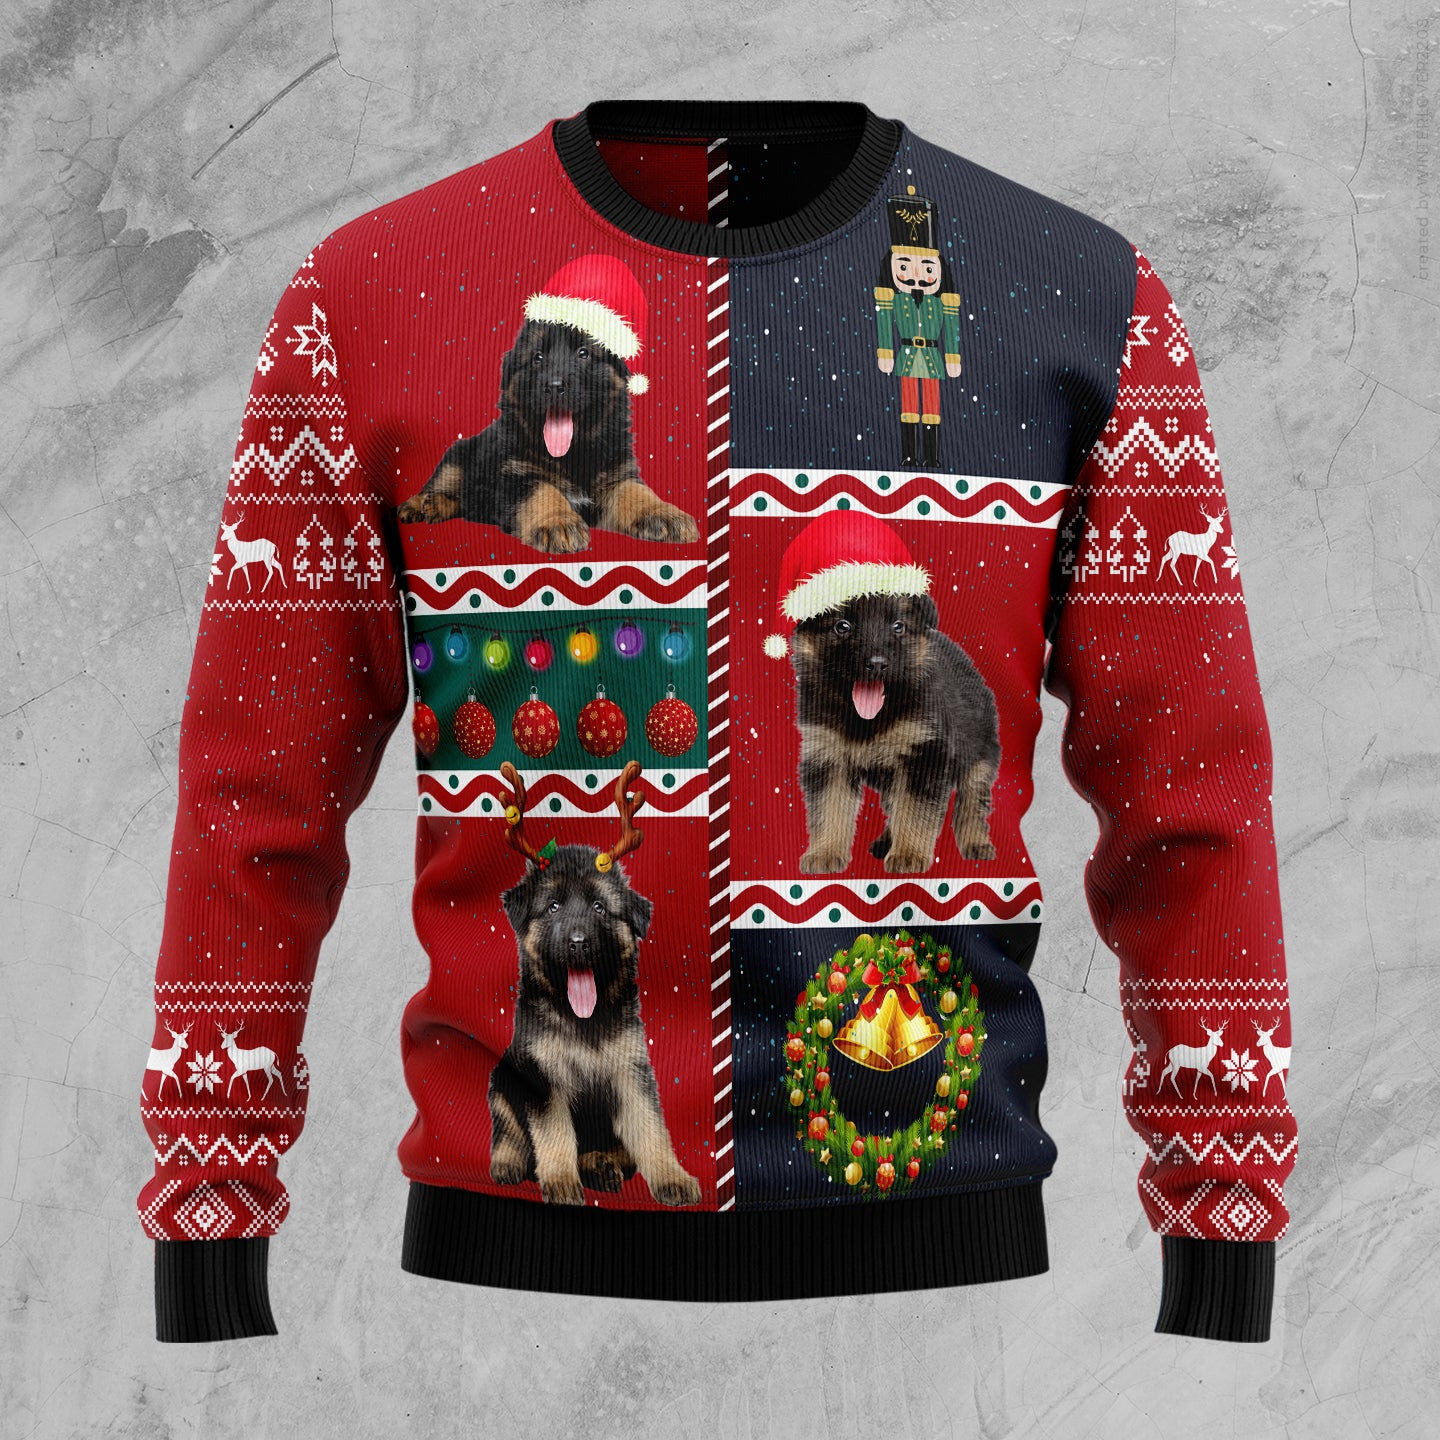 German Shepherd Vintage Ugly Christmas Sweater, Ugly Sweater For Men Women, Holiday Sweater